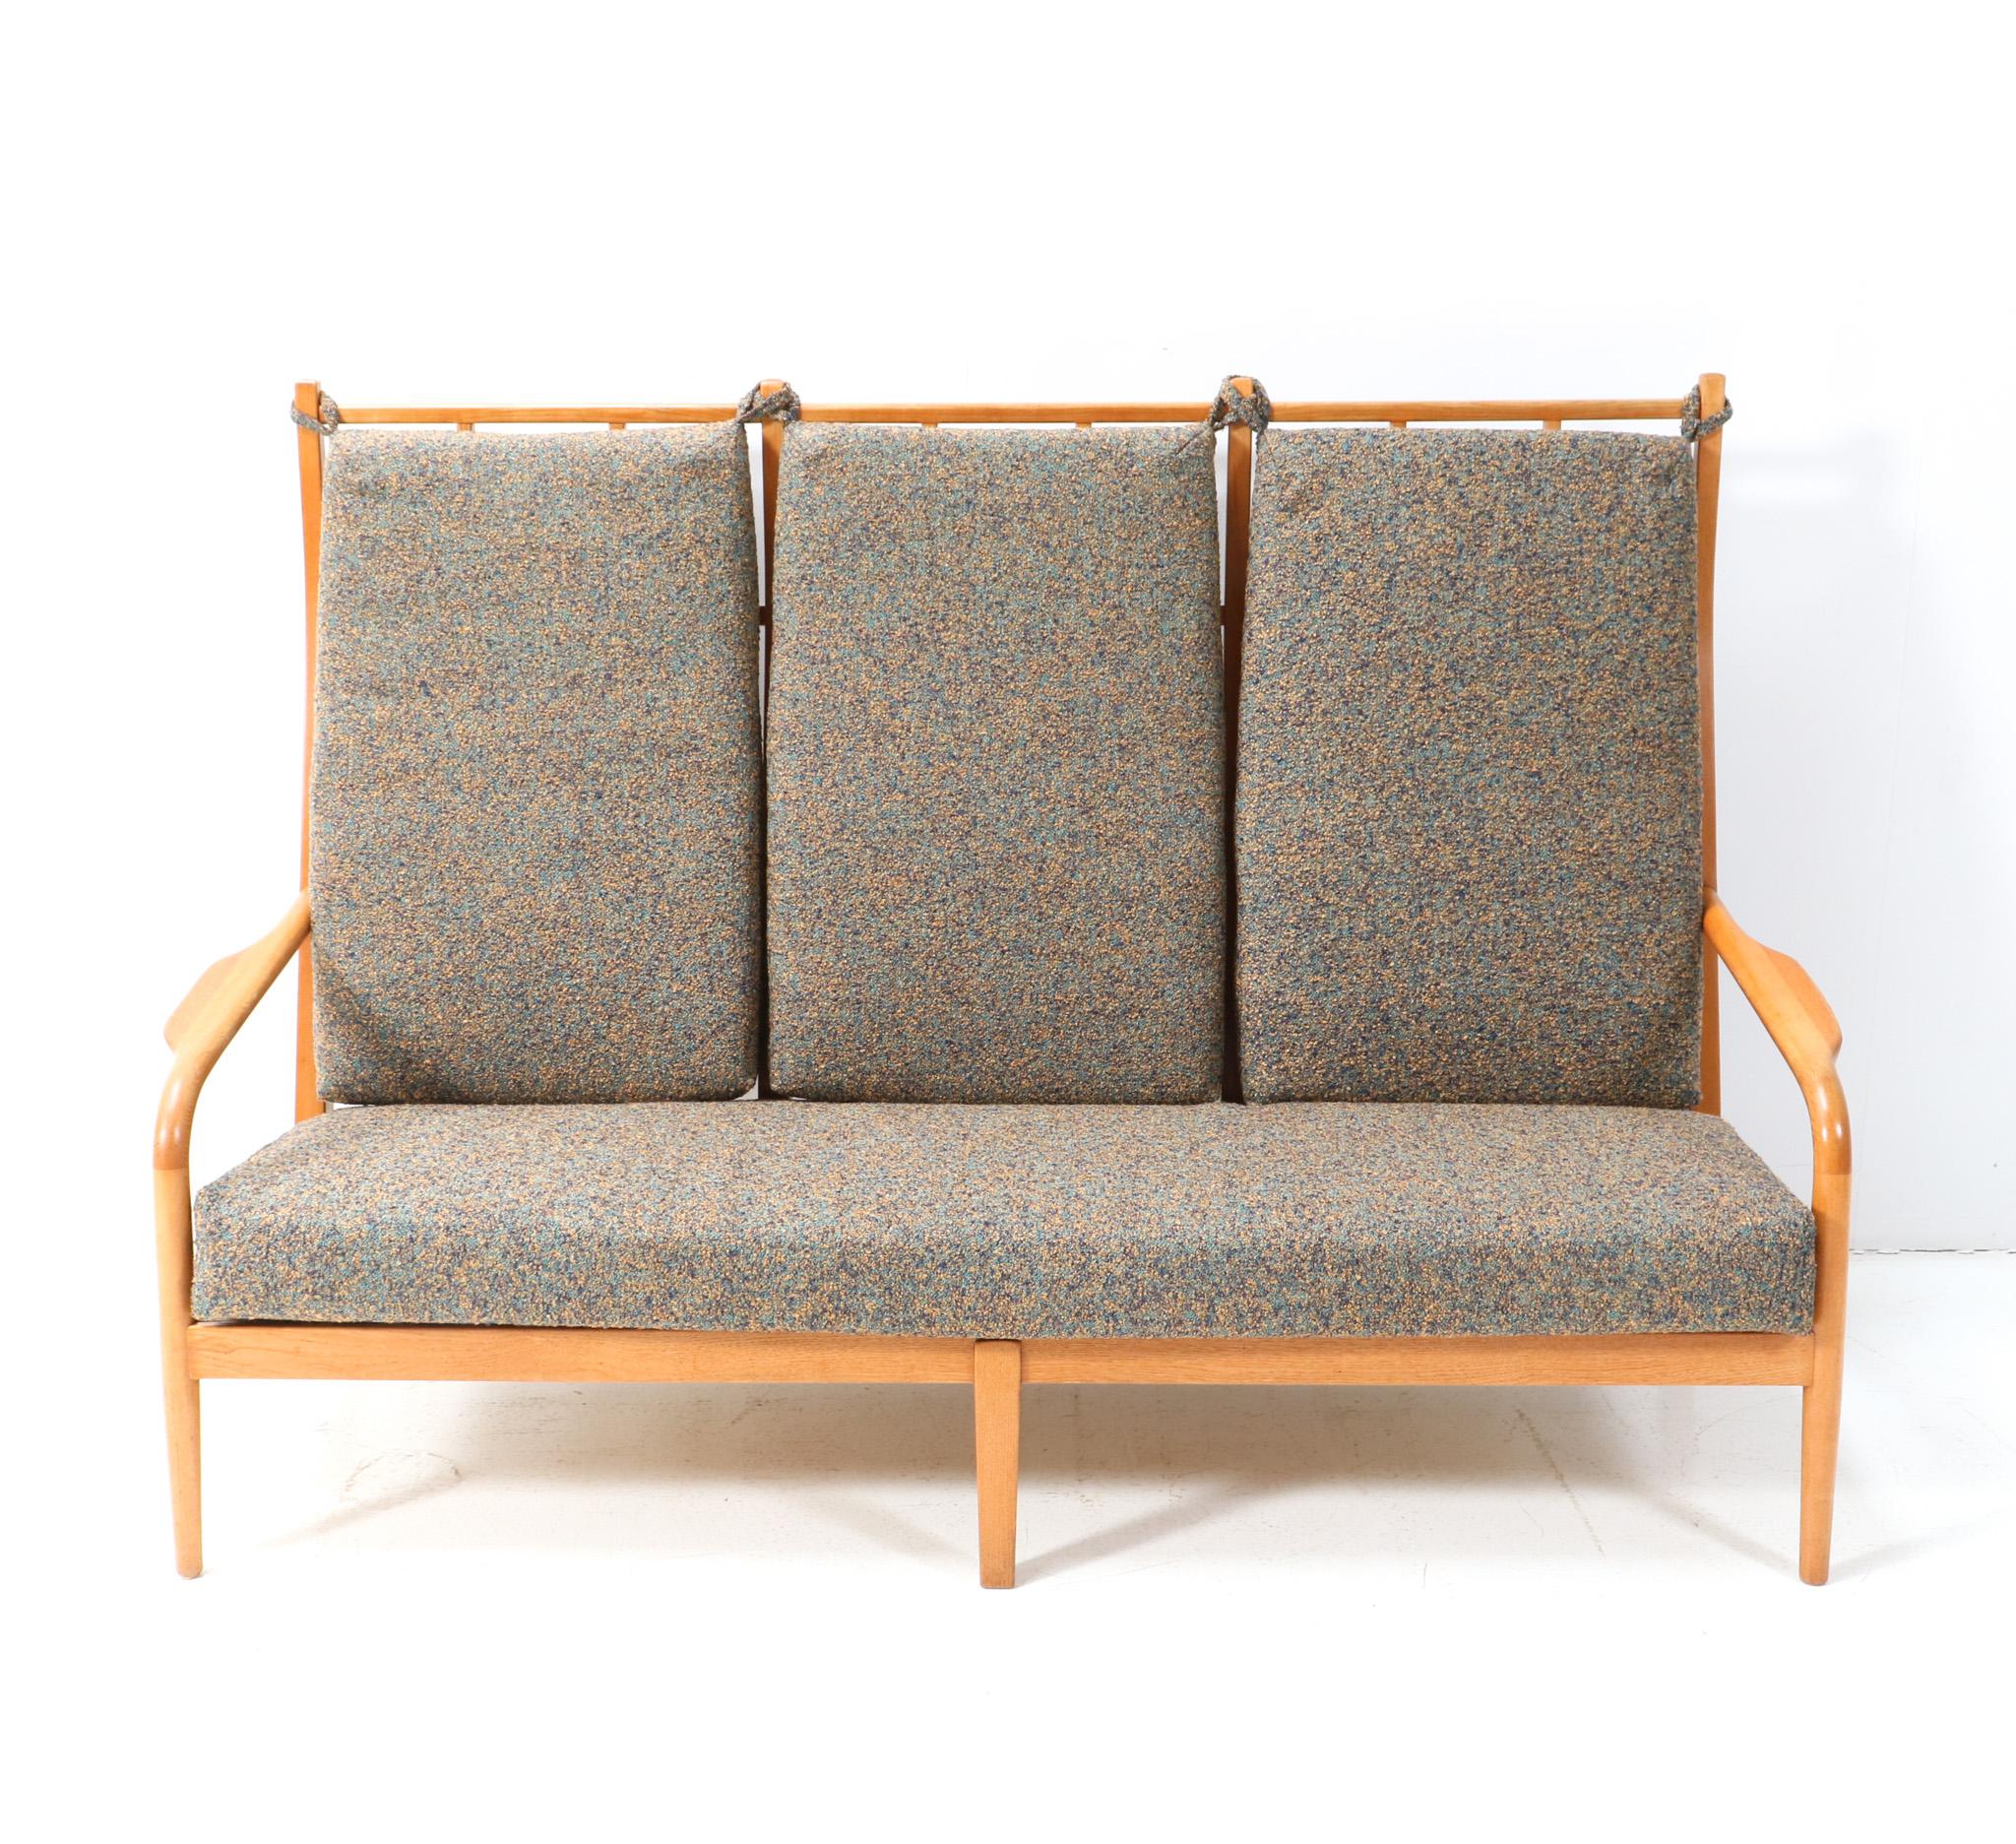 Magnificent and one of a kind Mid-Century Modern high back sofa or bench.
Design by Frits Eschauzier Jr.
Striking Dutch design from the 1960s.
Solid ash frame and the cushions are re-upholstered with a multi-colored Italian quality fabric.
This